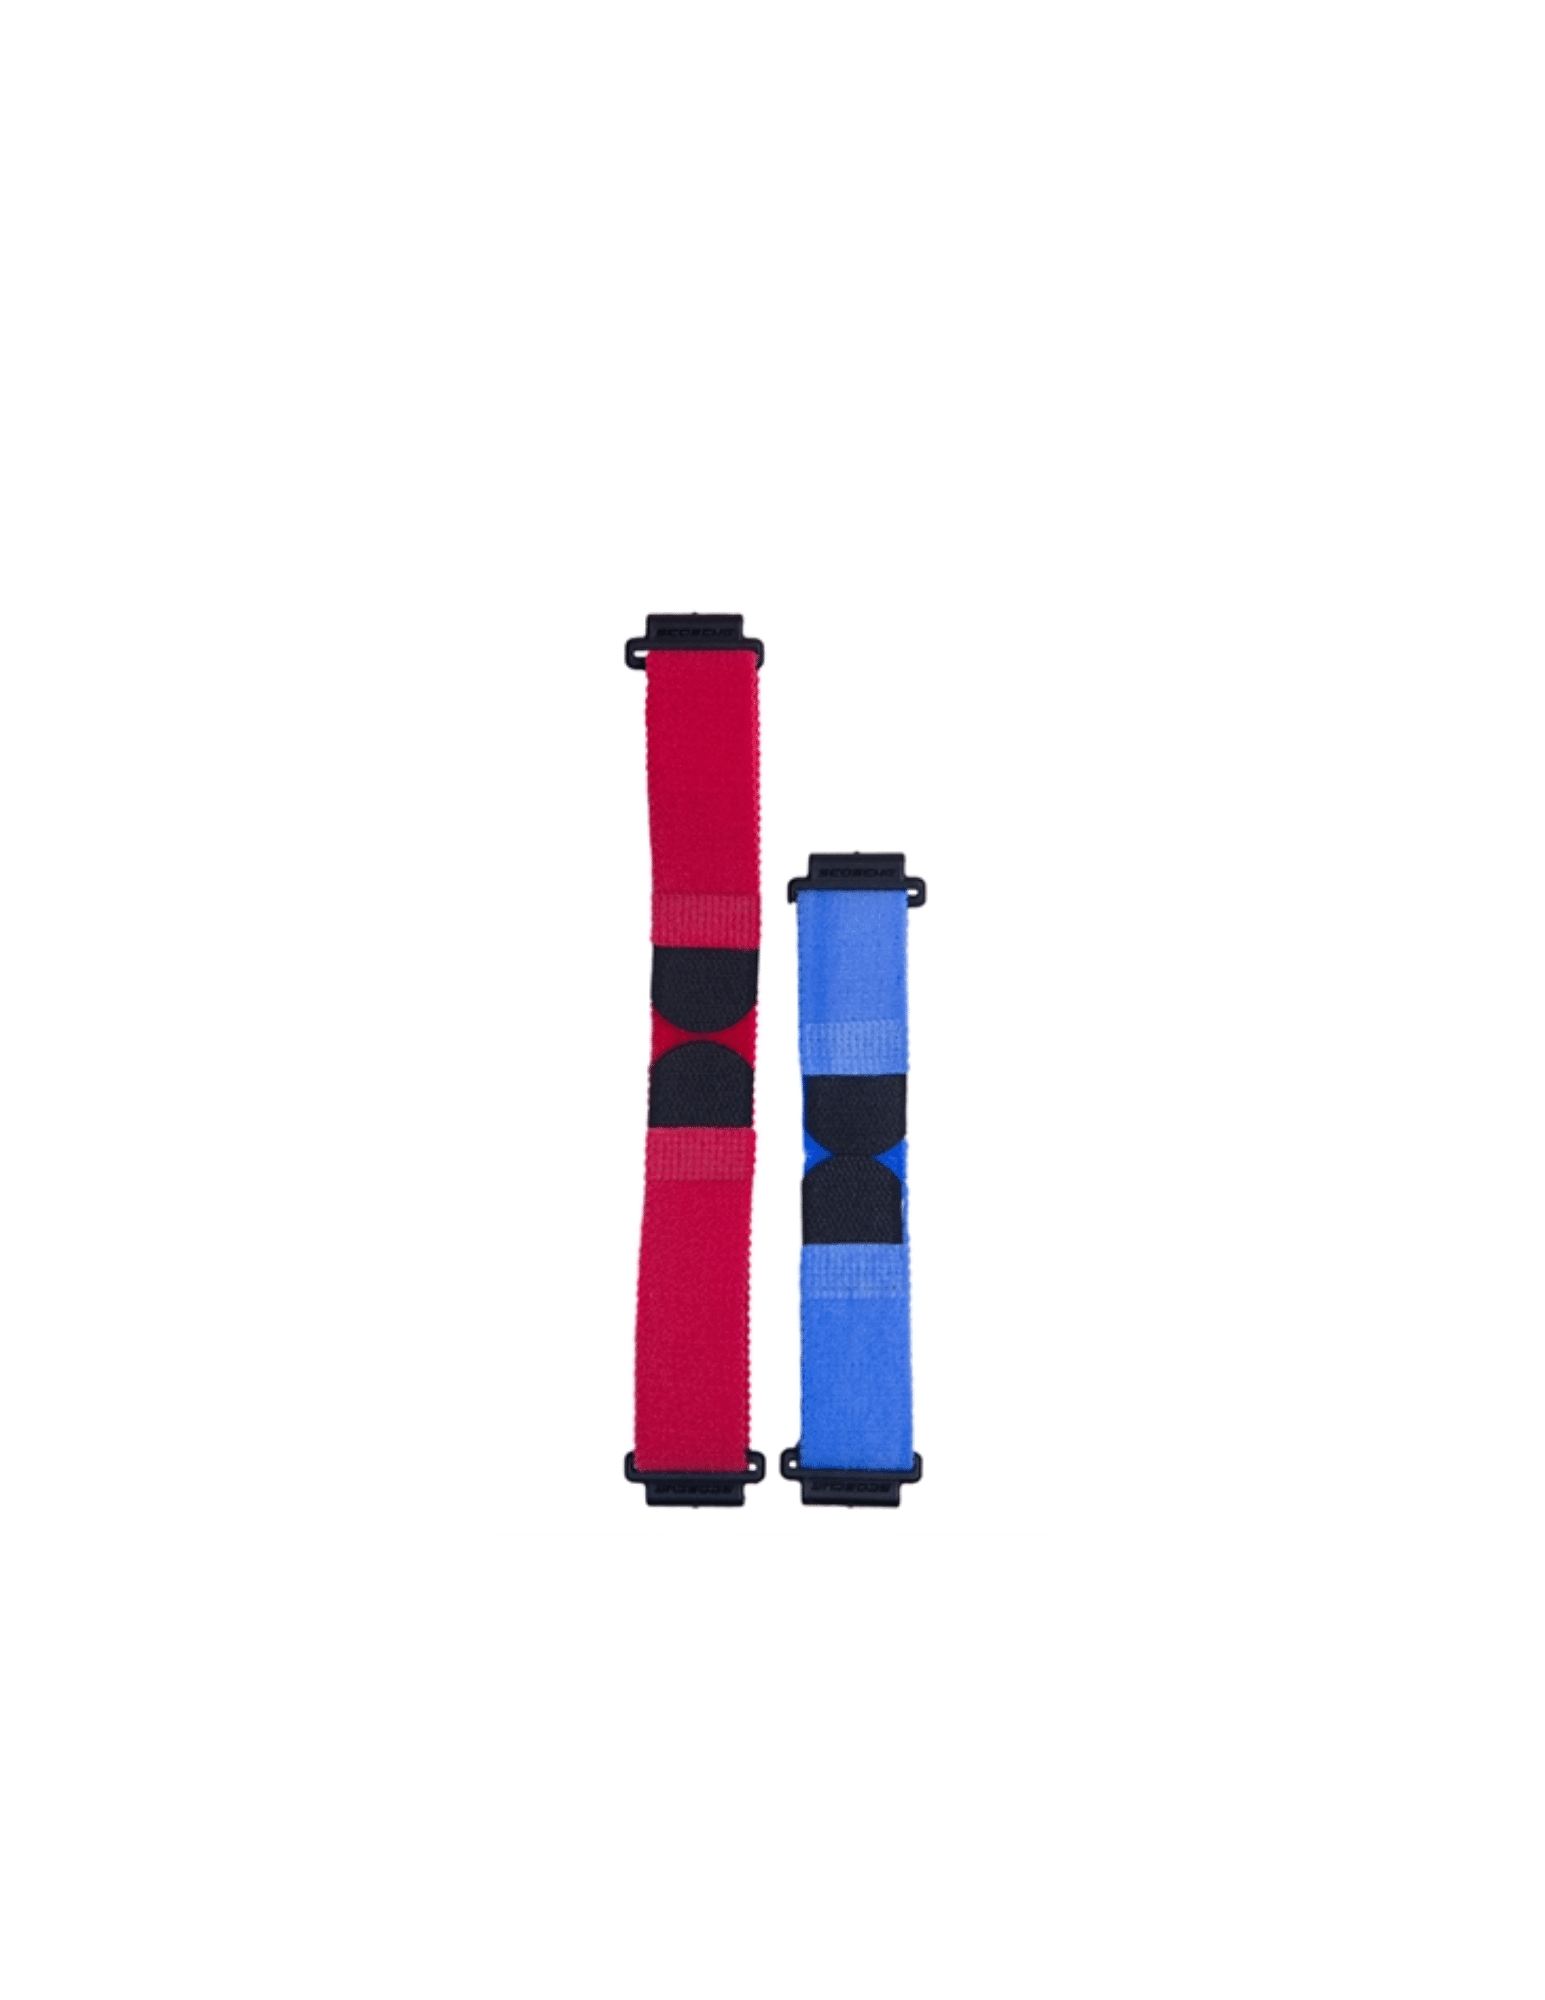 Straps with Clips for Blink 3.0, Blink 3.0+, Blink 24 by Heart